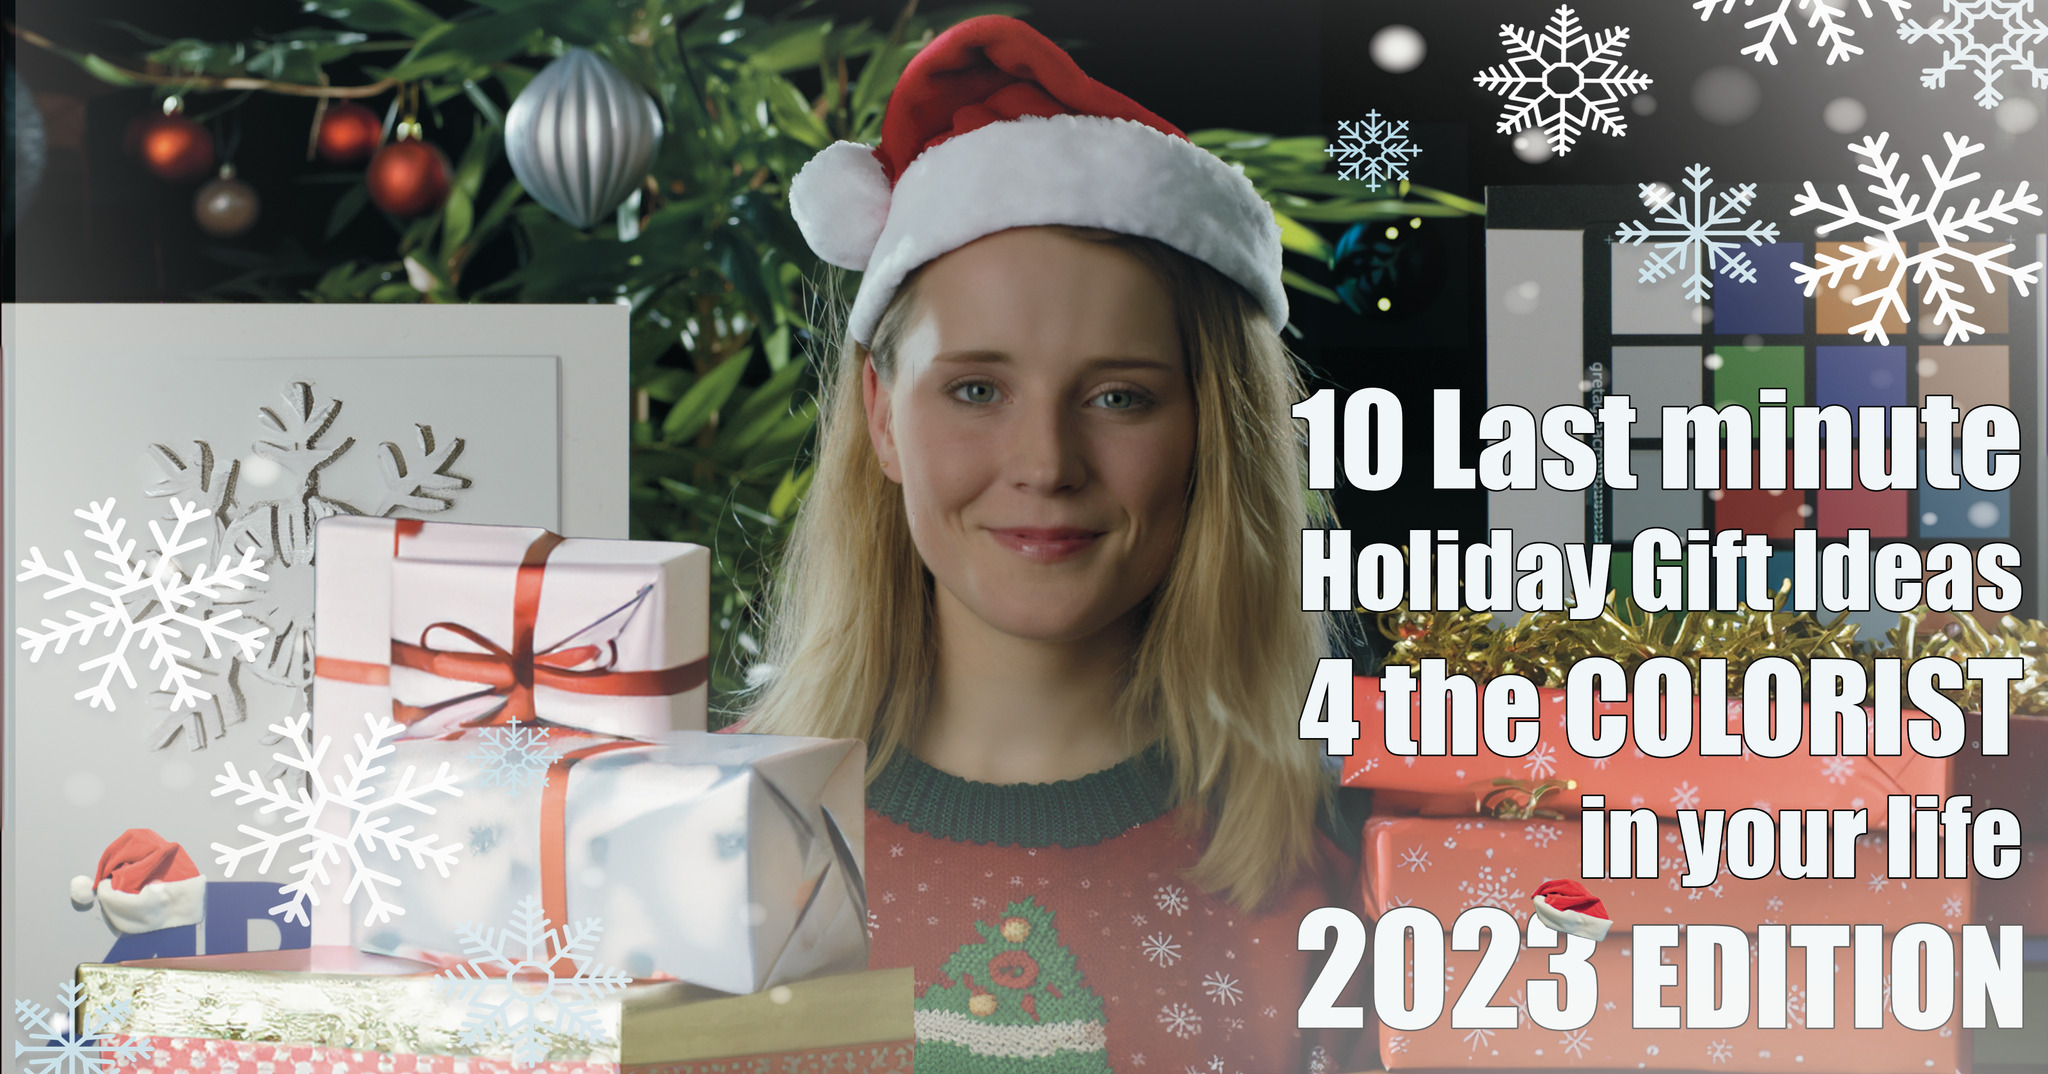 12 Last minute Holiday Gifts and Stocking Stuffers for the Colorist in your life - the 2023 edition.  2